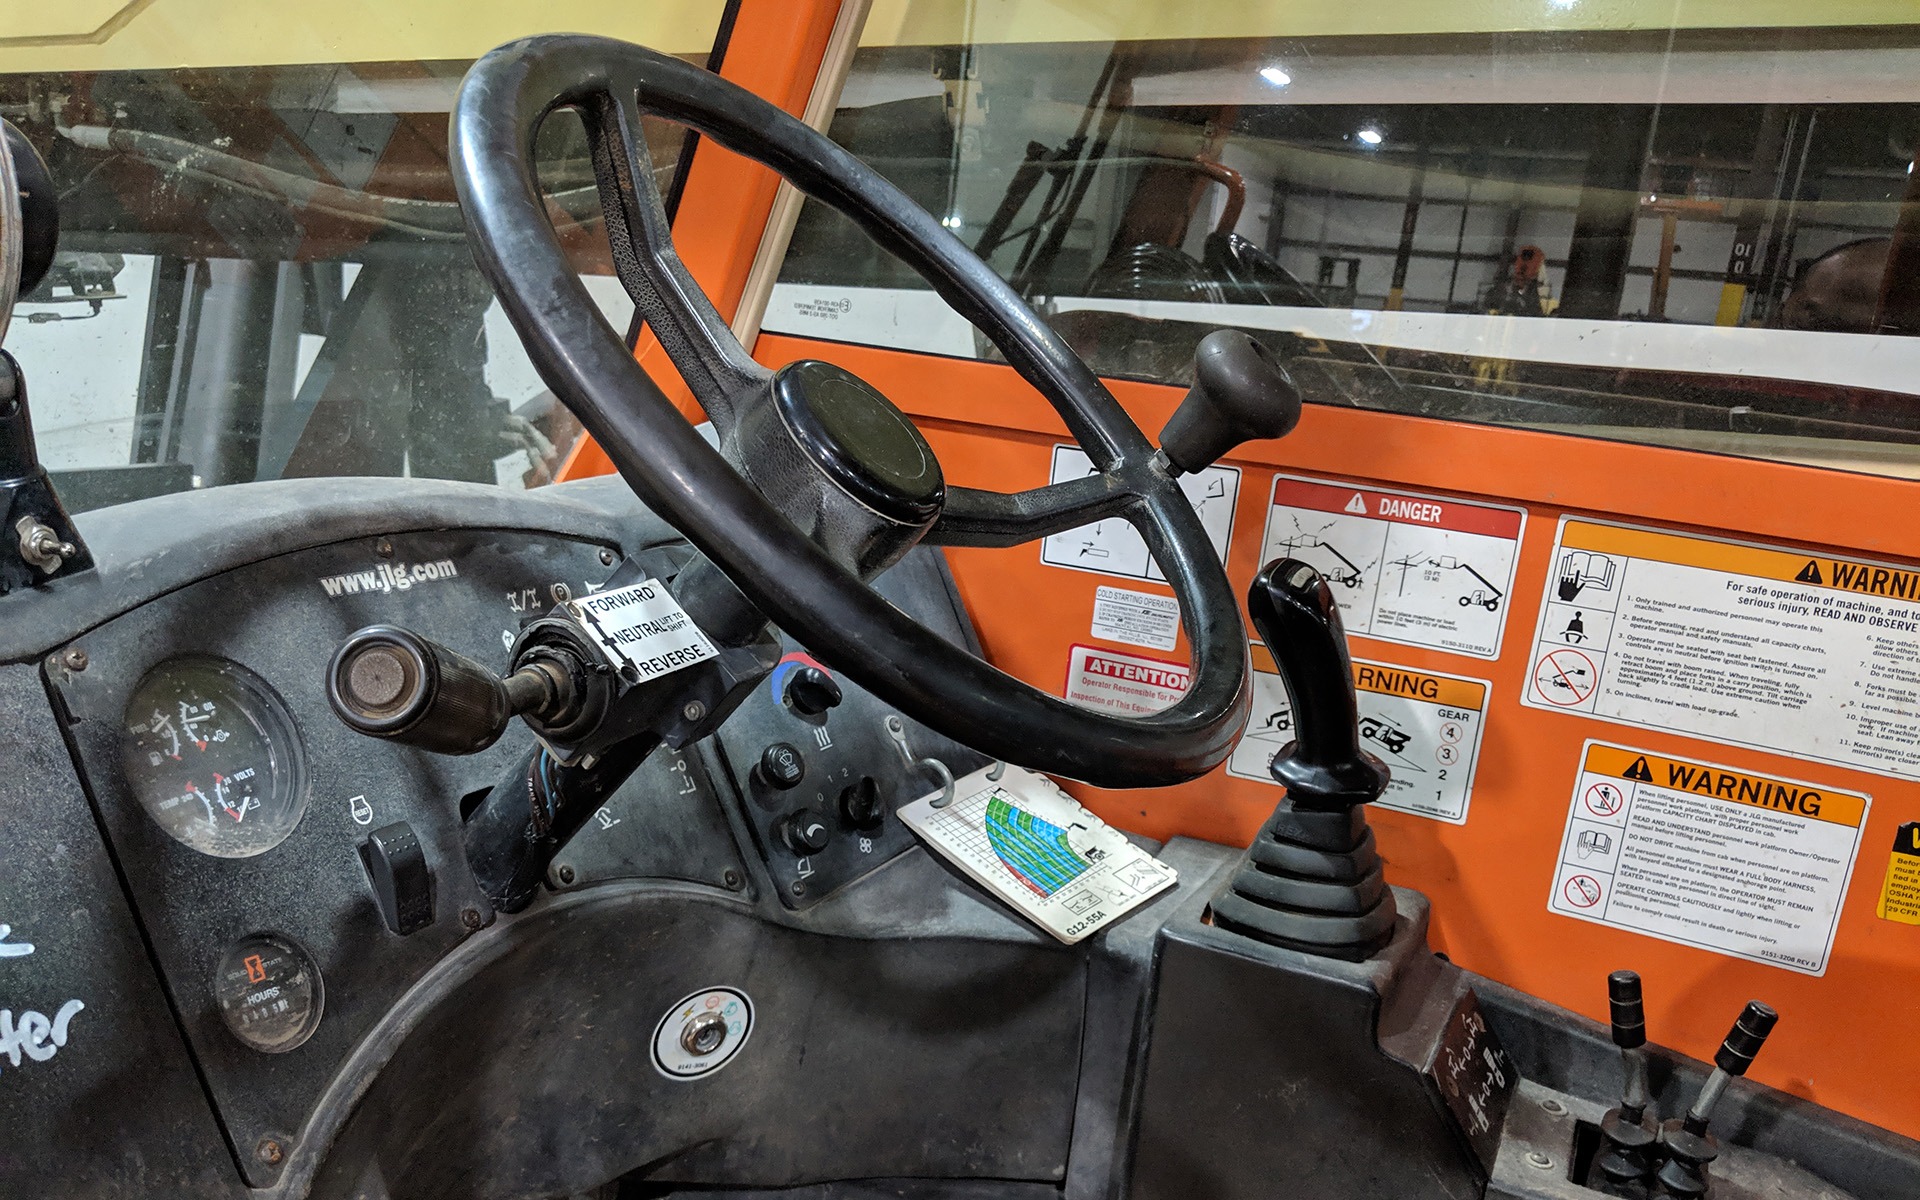 Used 2009 JLG G12-55A  | Cary, IL